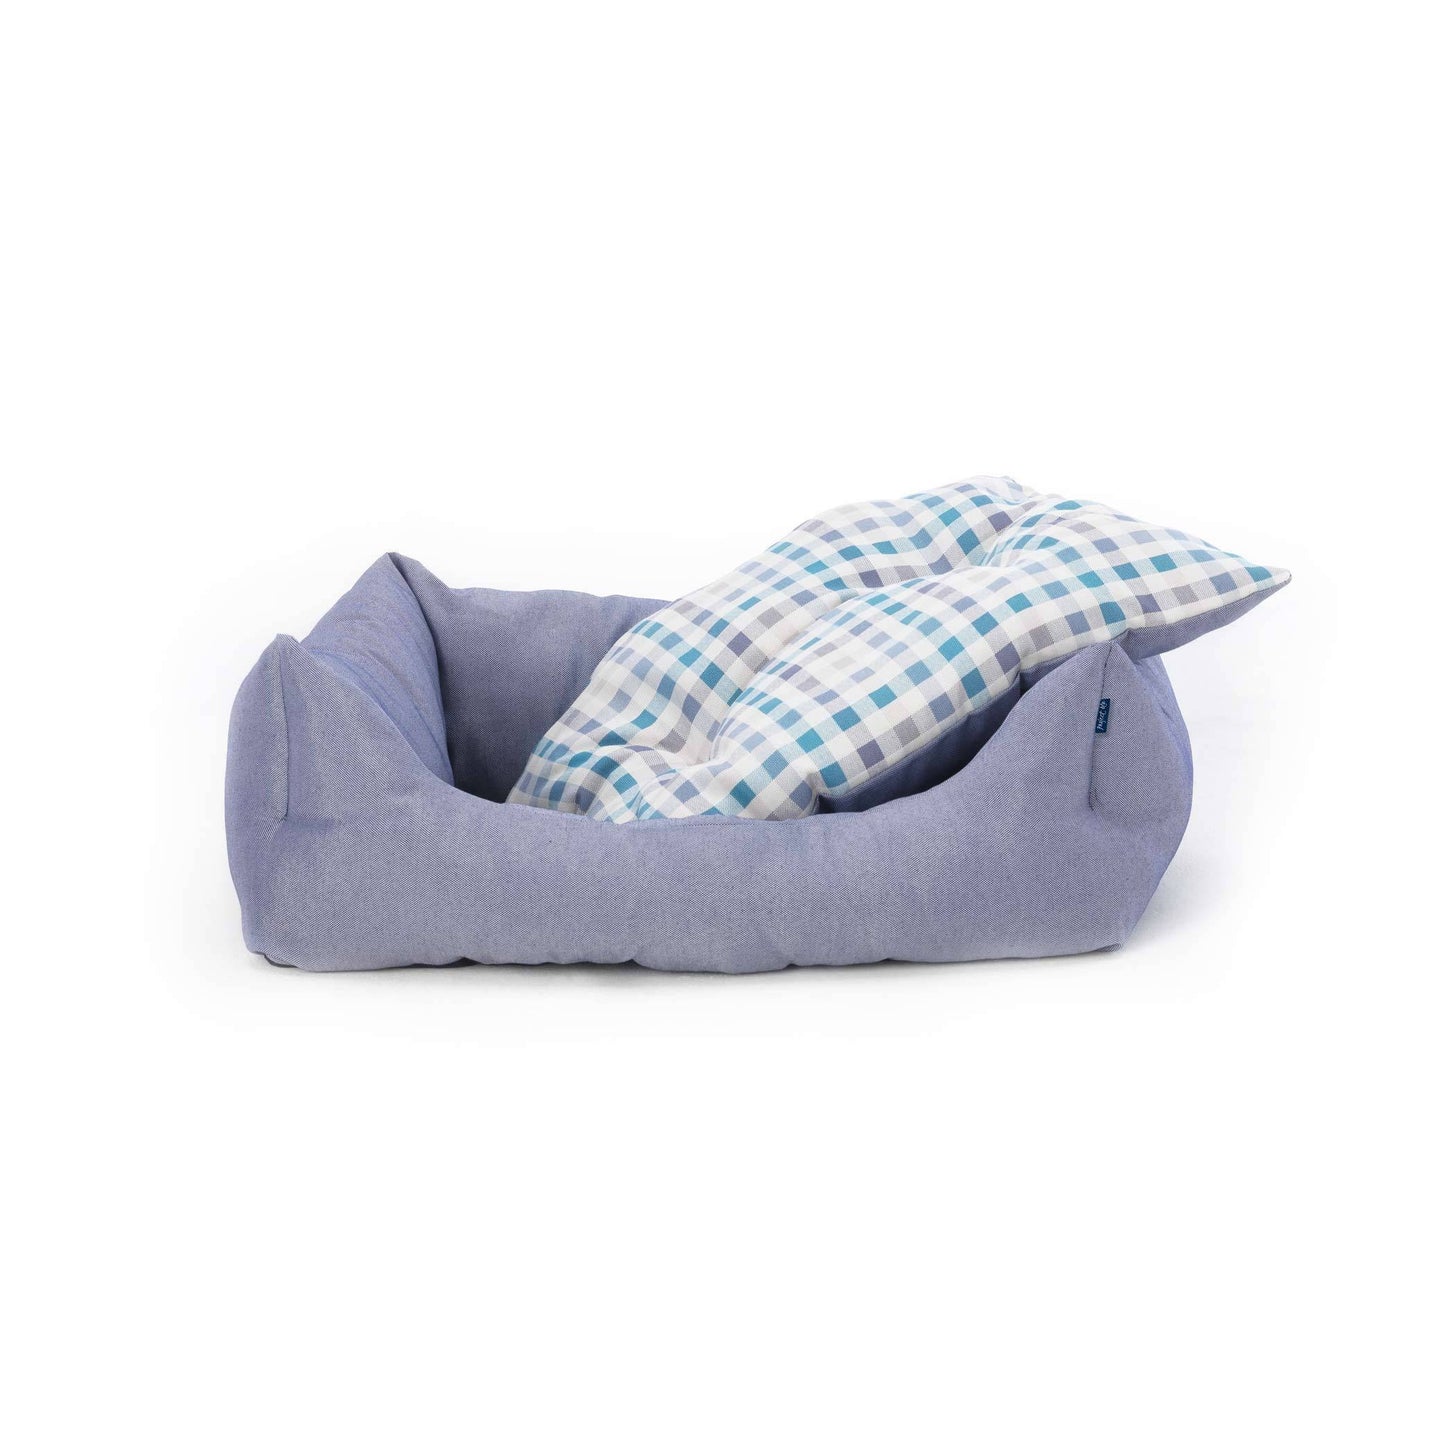 Project Blu Begal Eco Dog Bed Nest